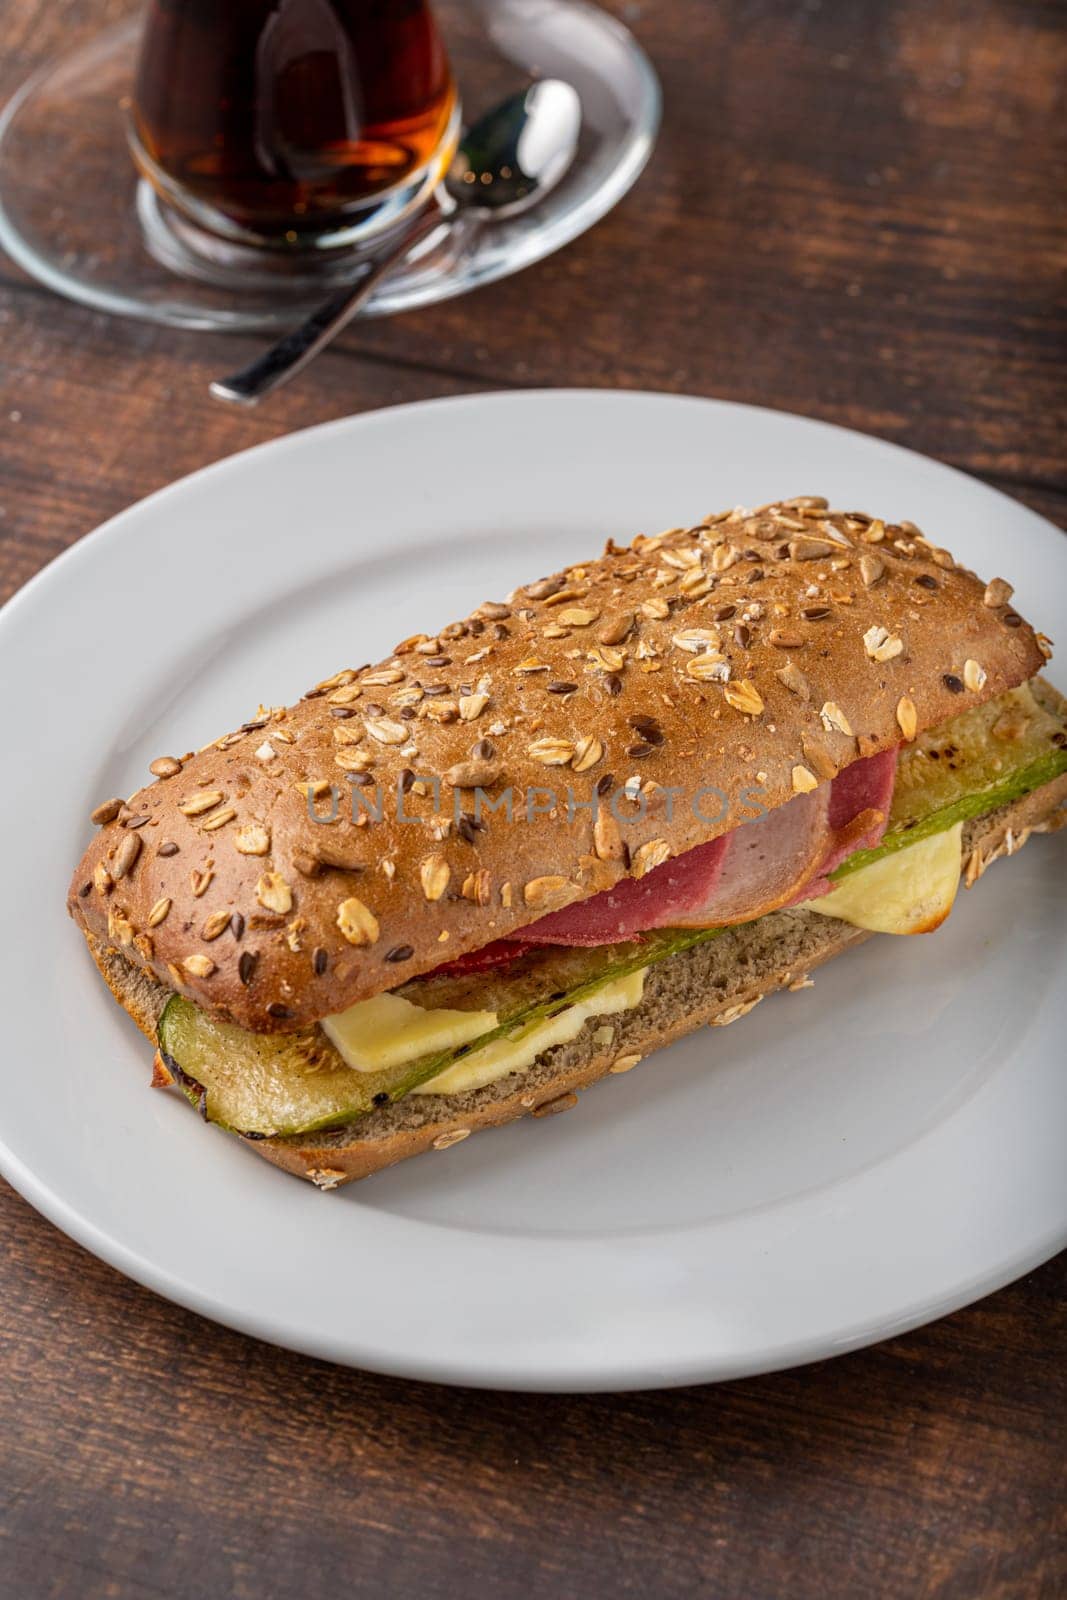 Vegetable and ham sandwich with tea on wooden table